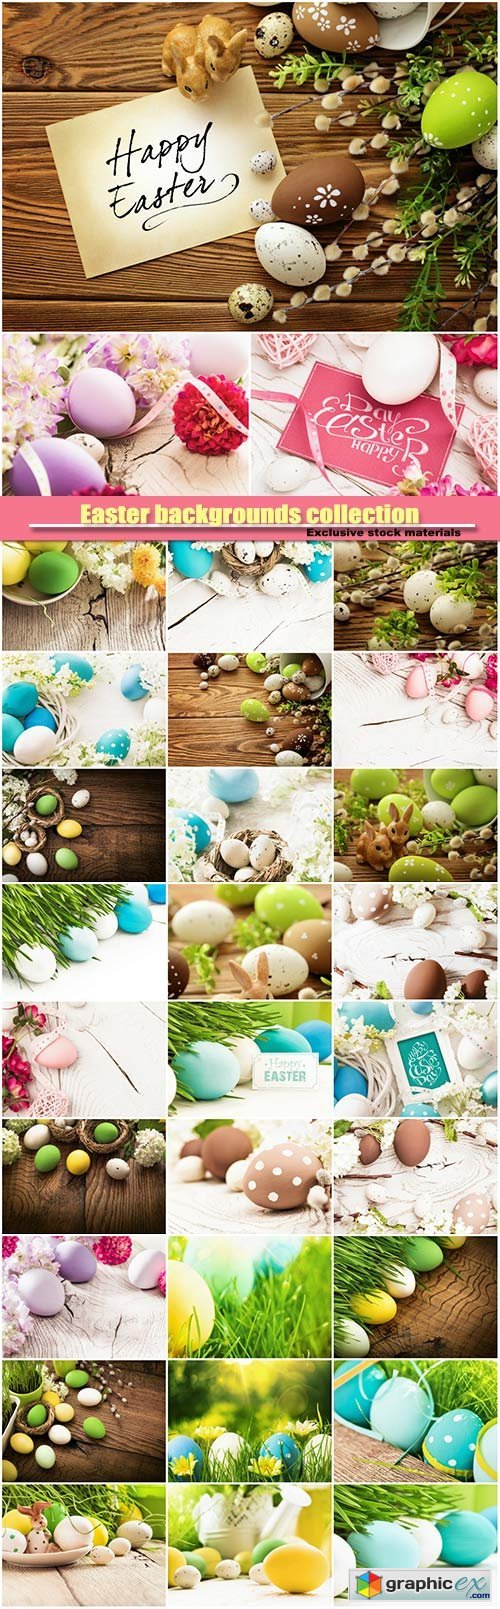 Easter backgrounds collection